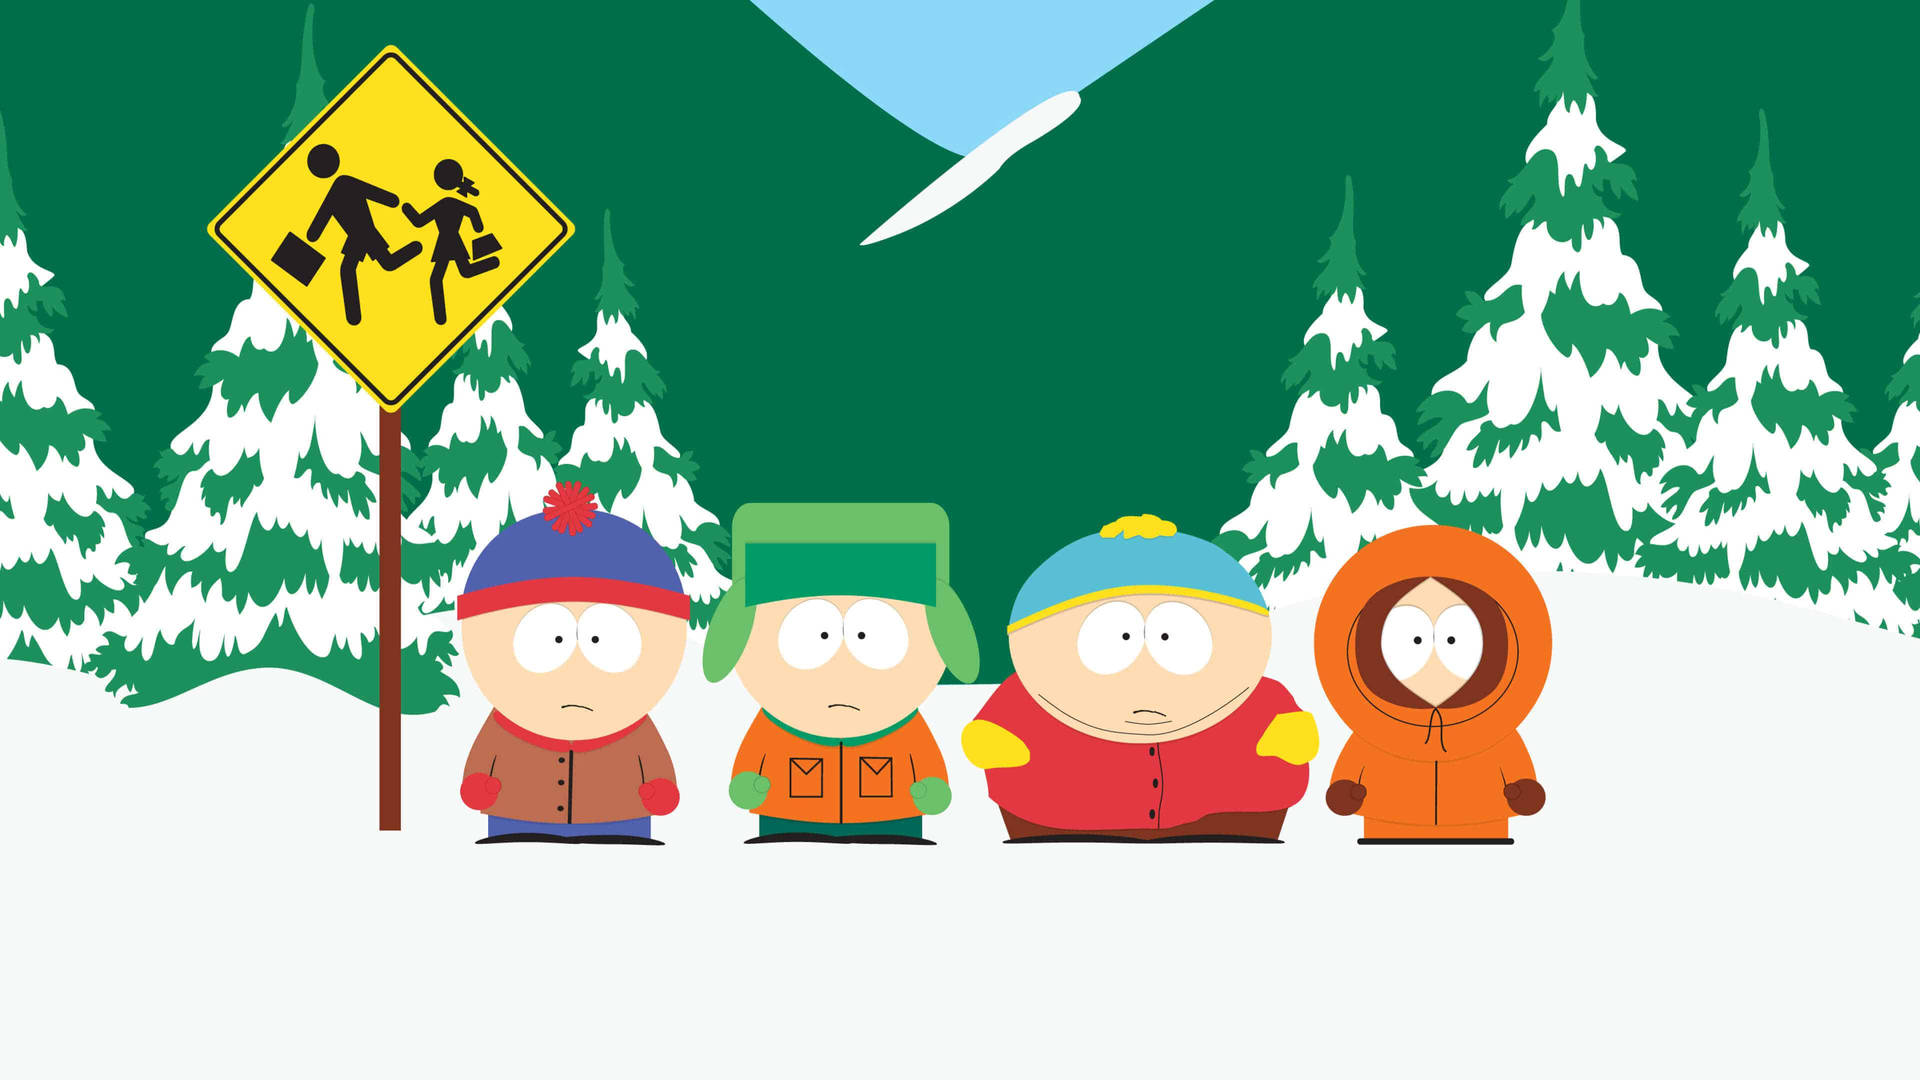 Free South Park Wallpaper Downloads, [100+] South Park Wallpapers for FREE  